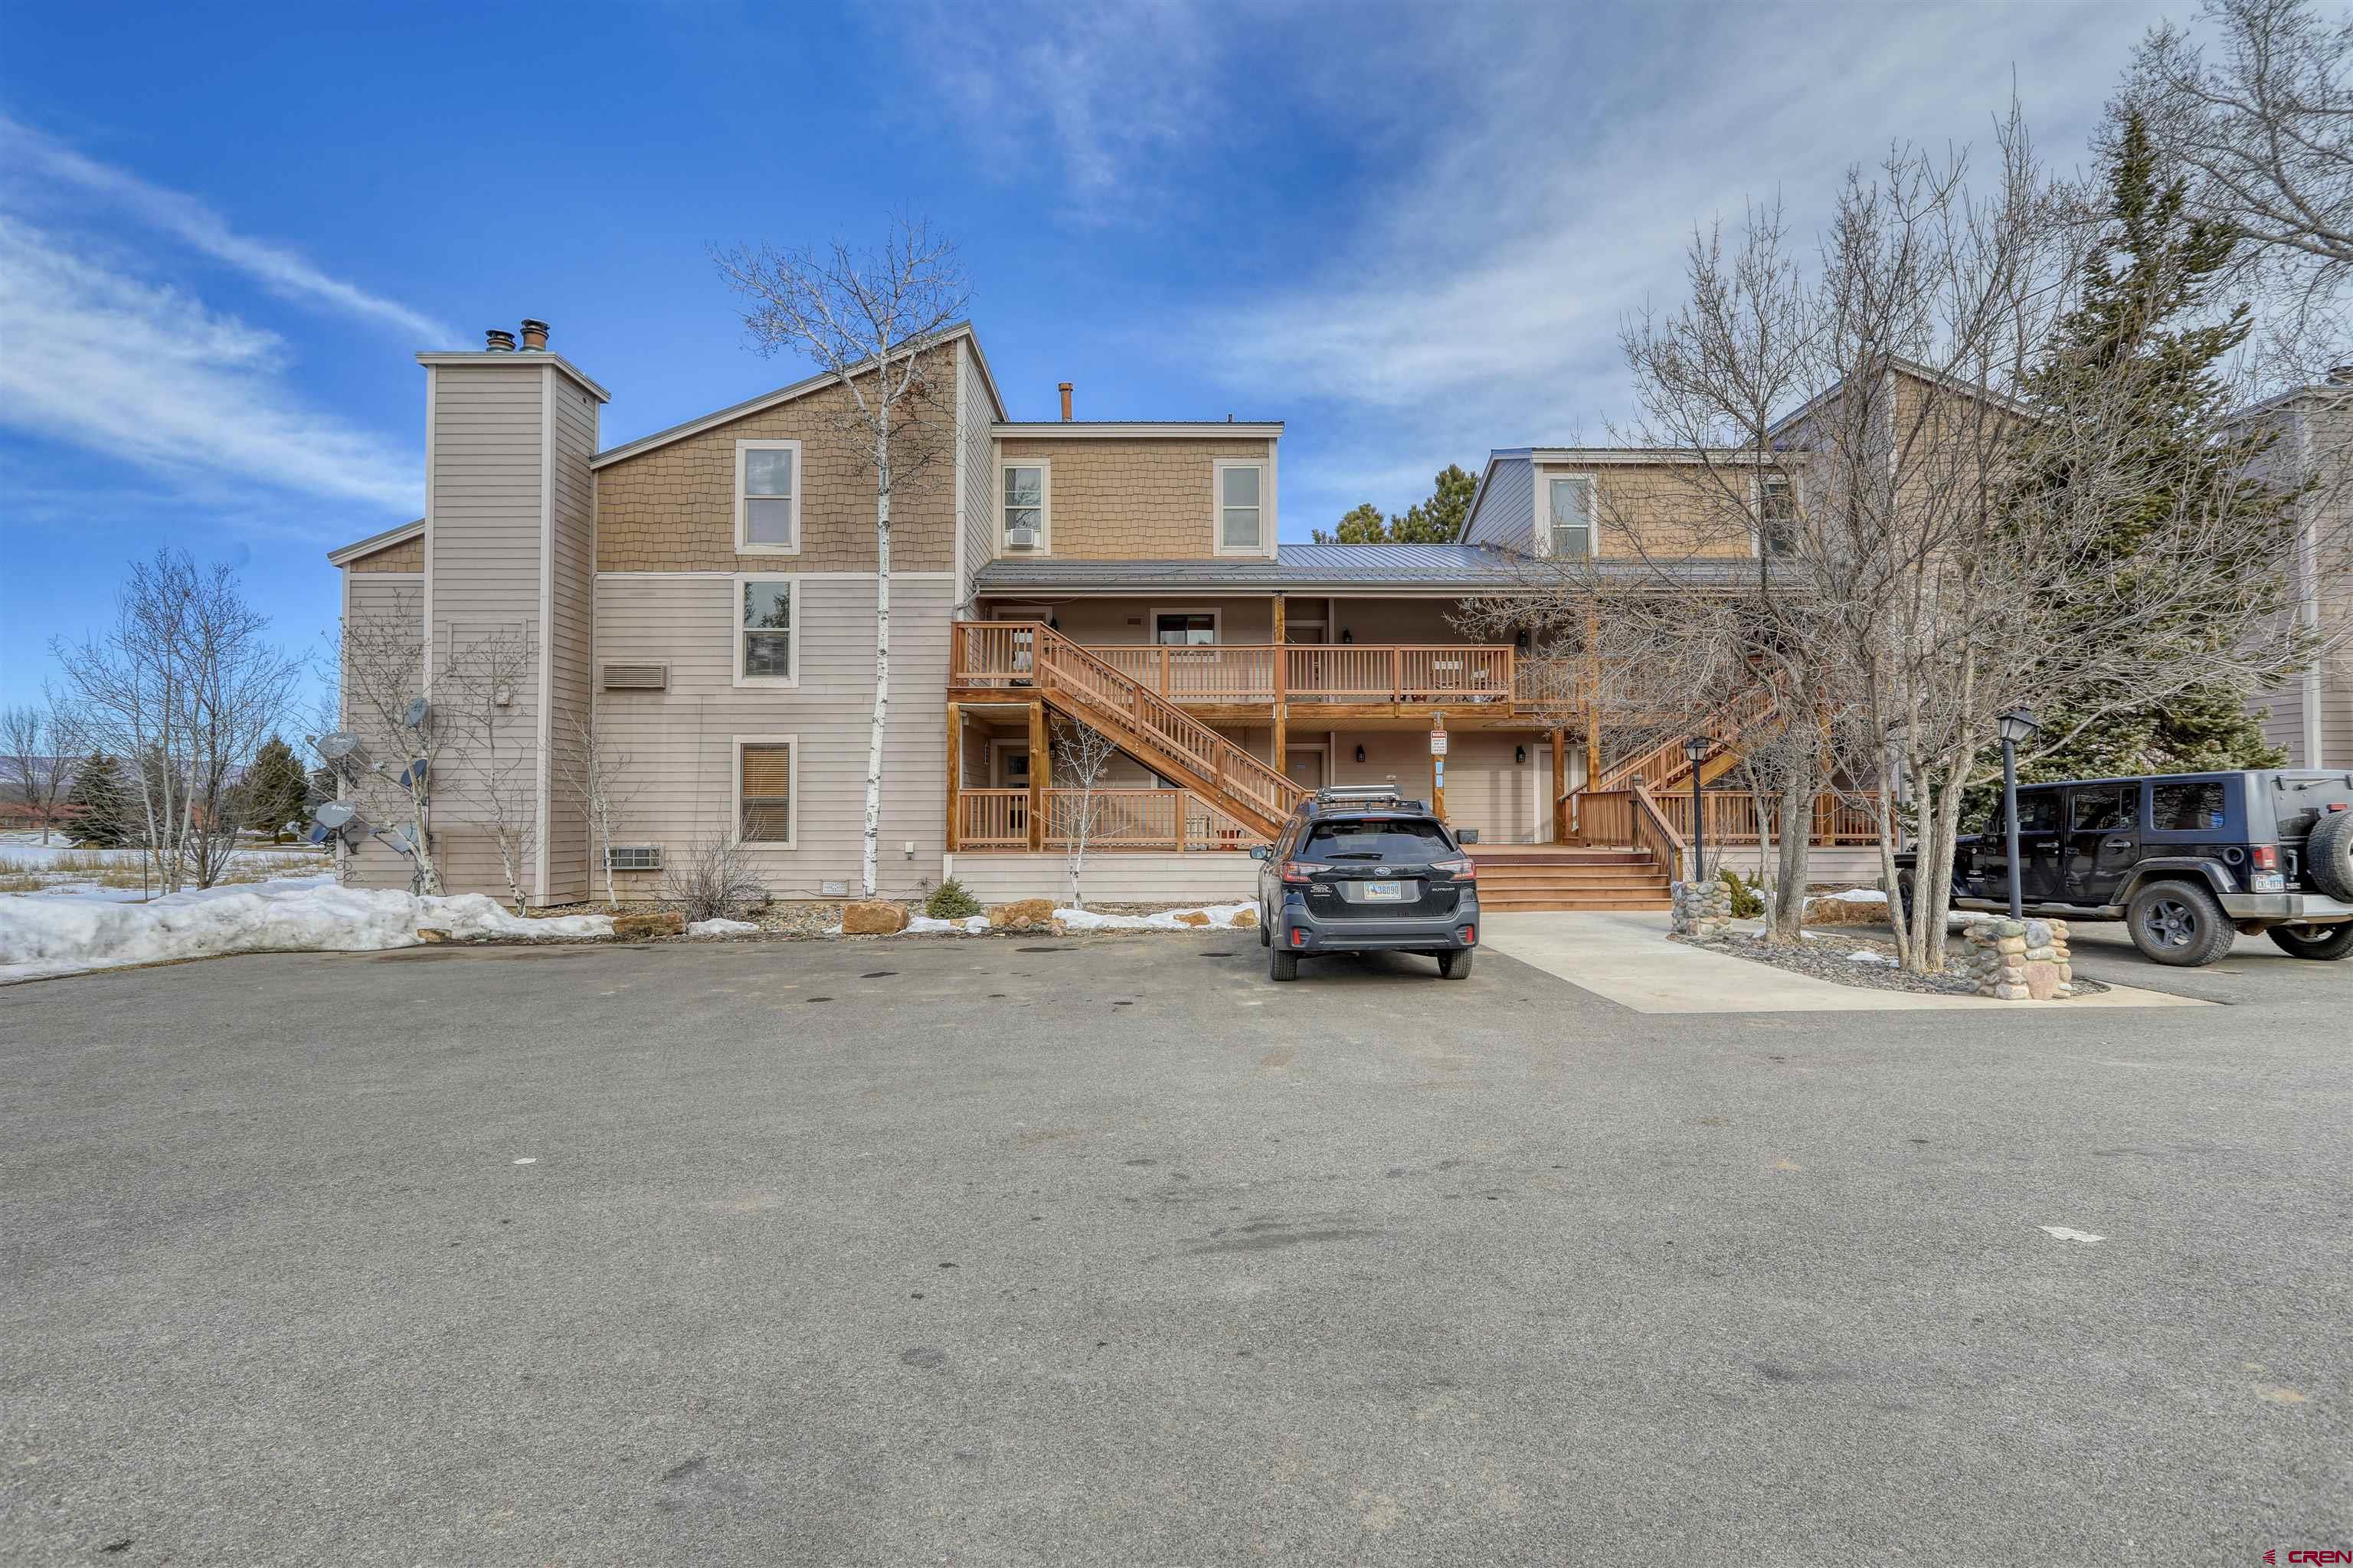 89 Valley View Drive, #3197, Pagosa Springs, CO 81147 Listing Photo  1